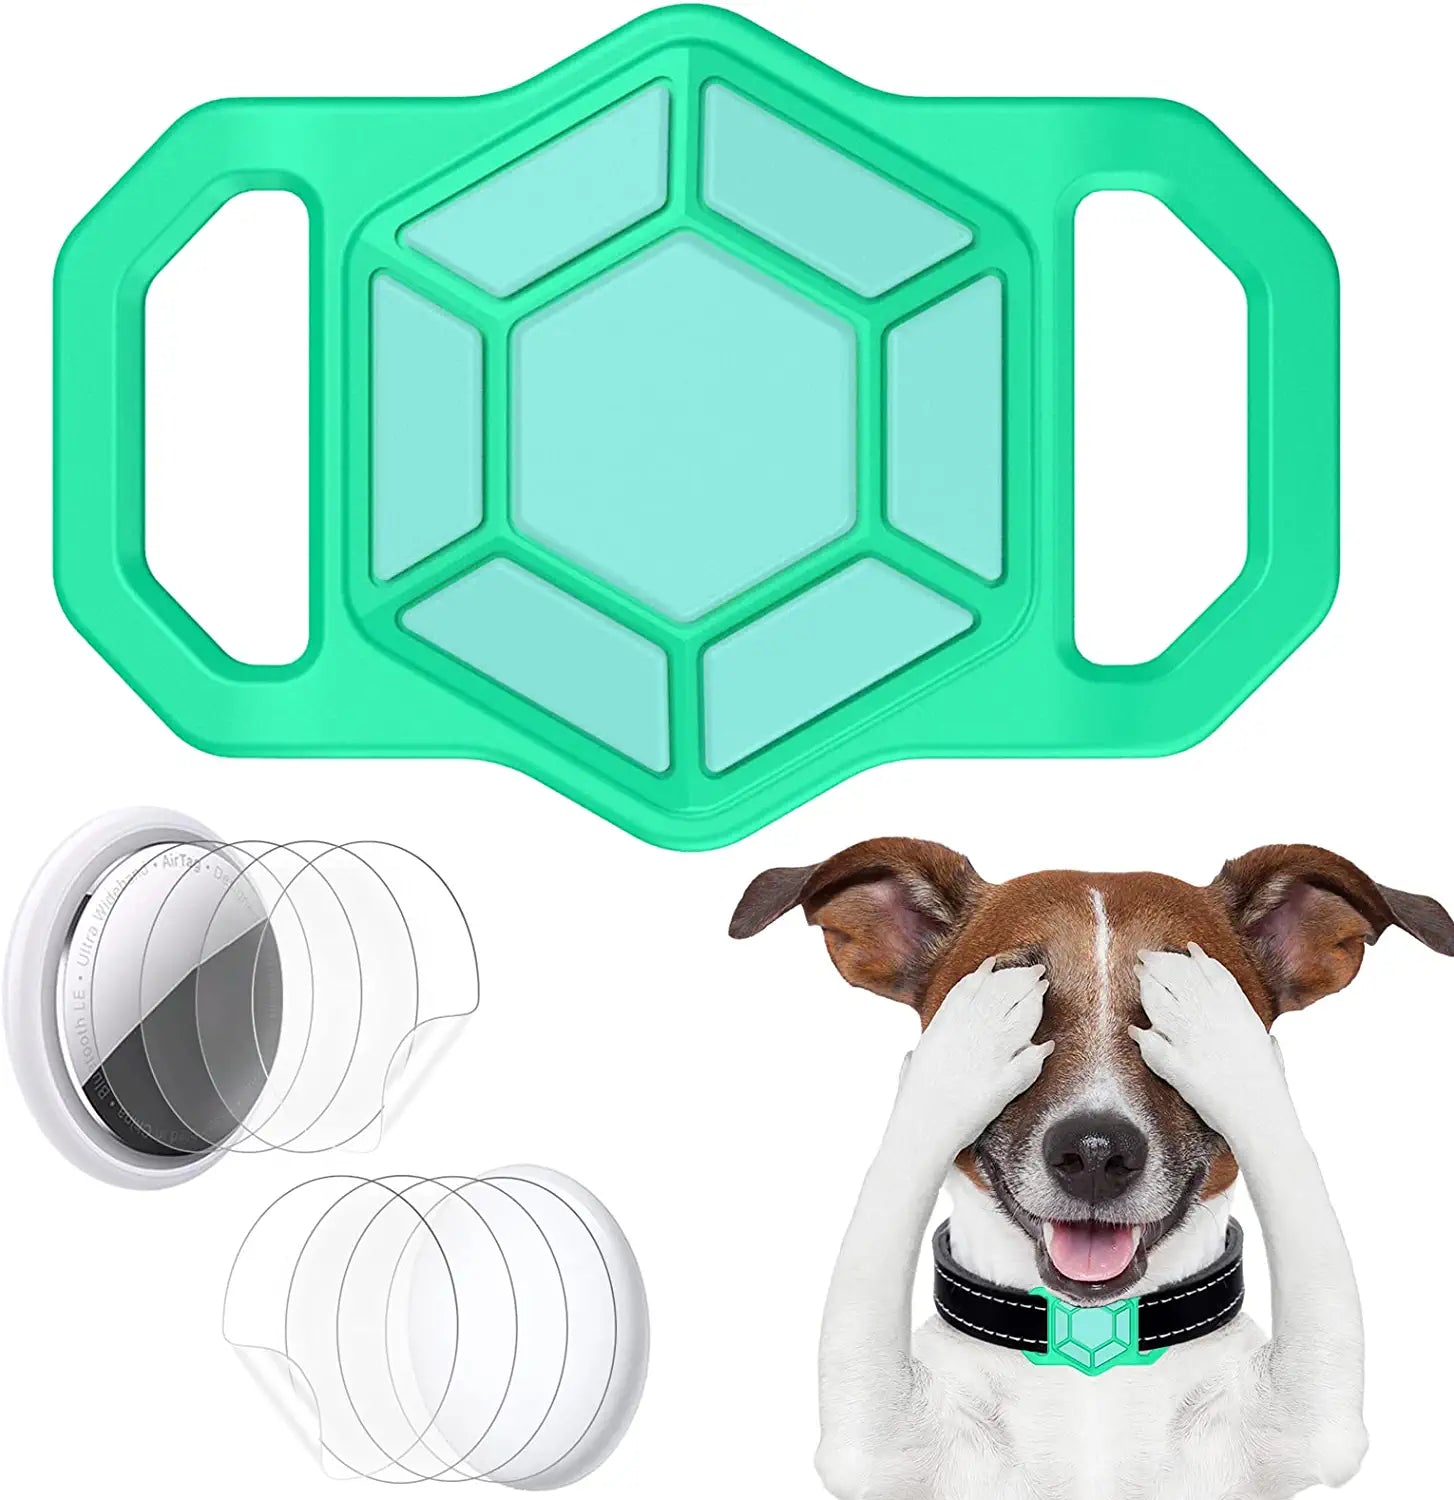 Protective Case Compatible for Apple Airtags for Dog Cat Collar Pet Loop Holder, Airtag Holder Accessories with Screen Protectors, Air Tag Silicone Cover for Pet Collar Electronics > GPS Accessories > GPS Cases Wustentre Luminous Mint Green  